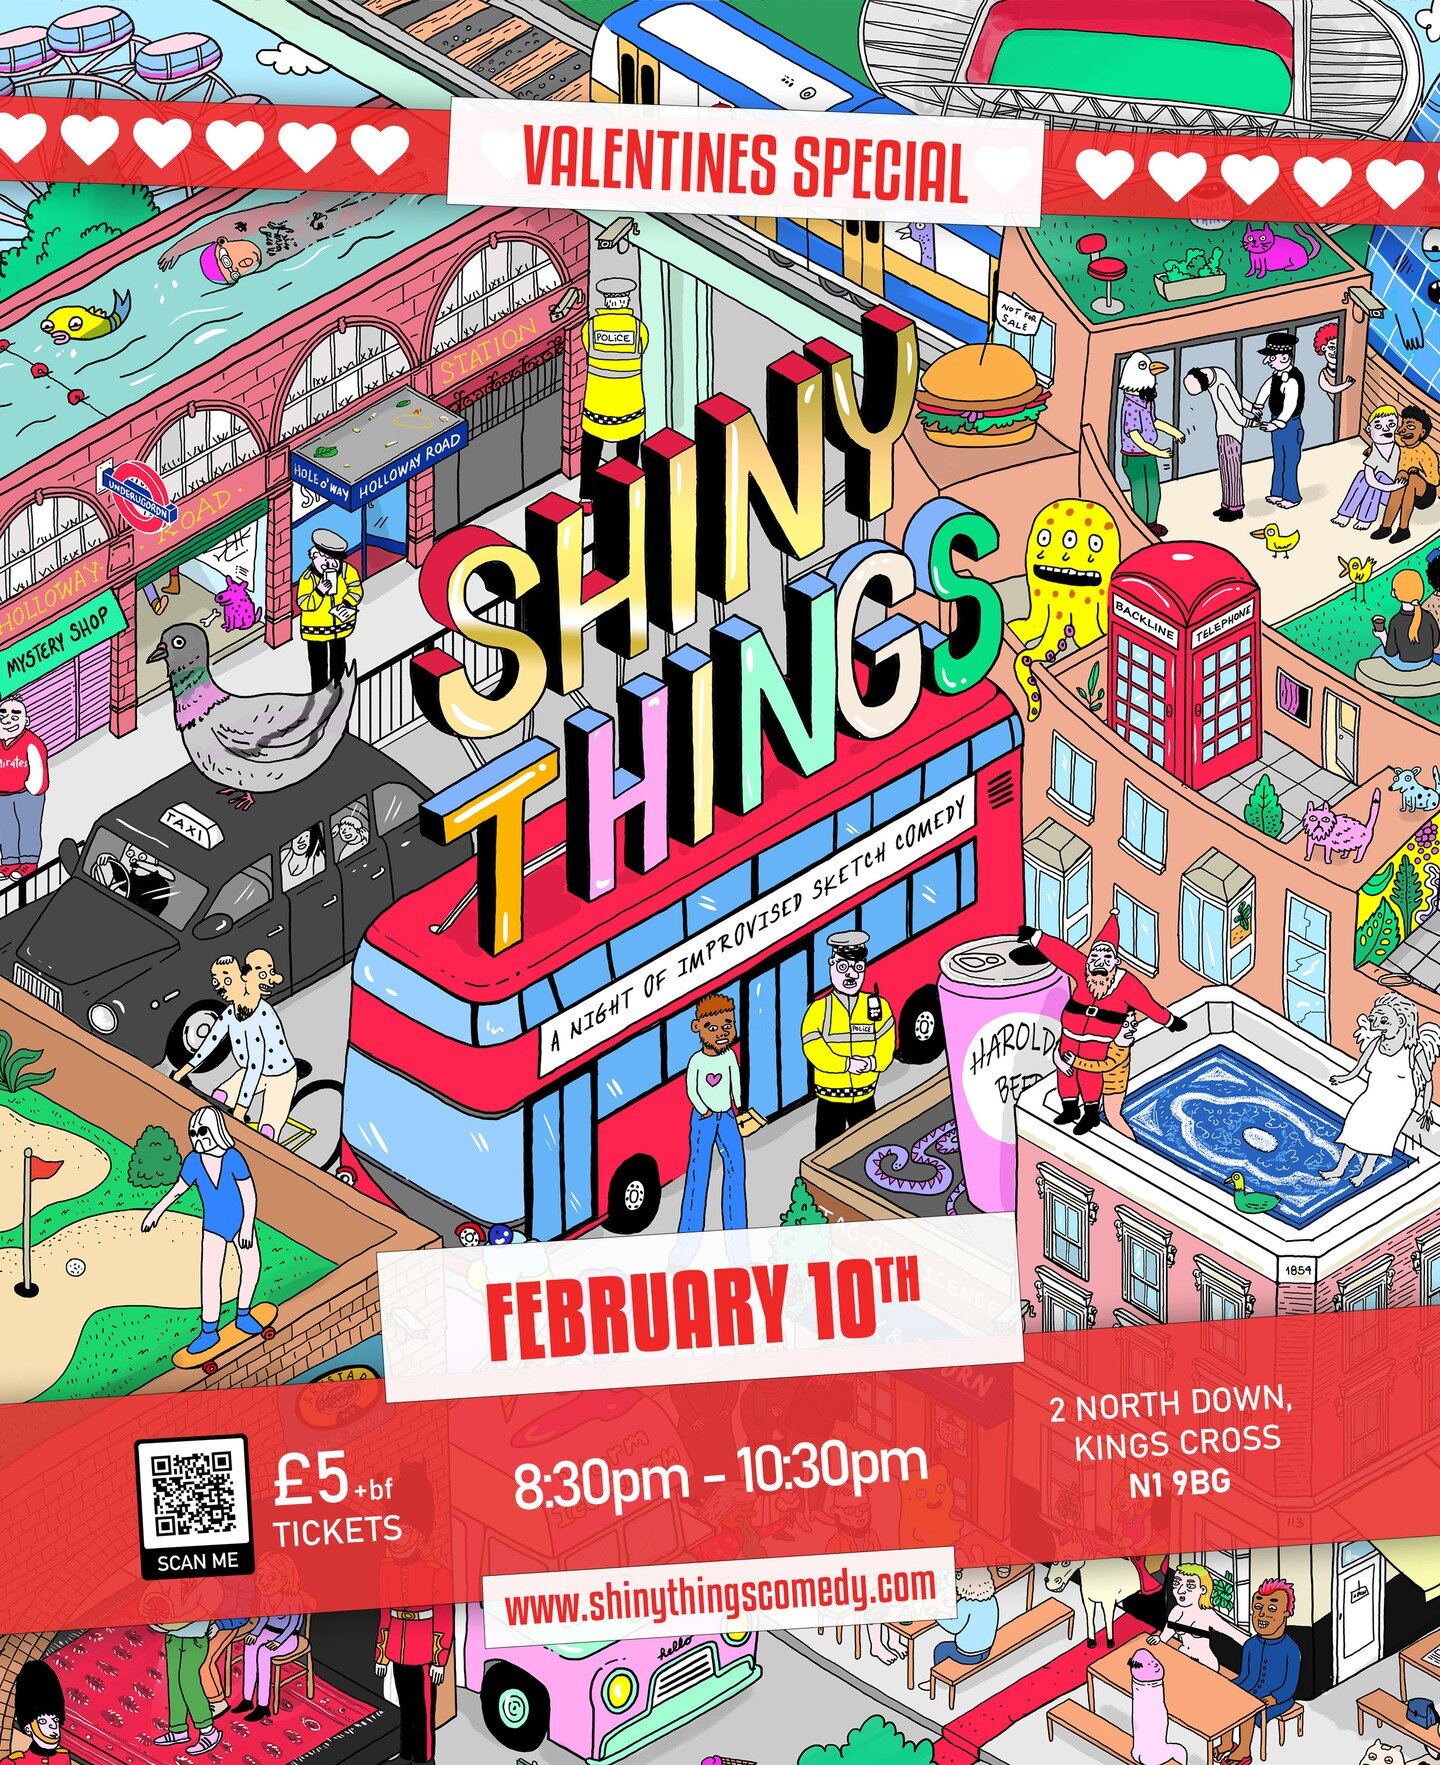 Shiny Things is back with our first show of 2023 - and it's in a NEW VENUE. On February 10th will be getting all soppy and romantic (and hilarious) for a valentines special at @2northdown in Kings Cross! 🥰❤
Whether you are a romantic or a cynic, the